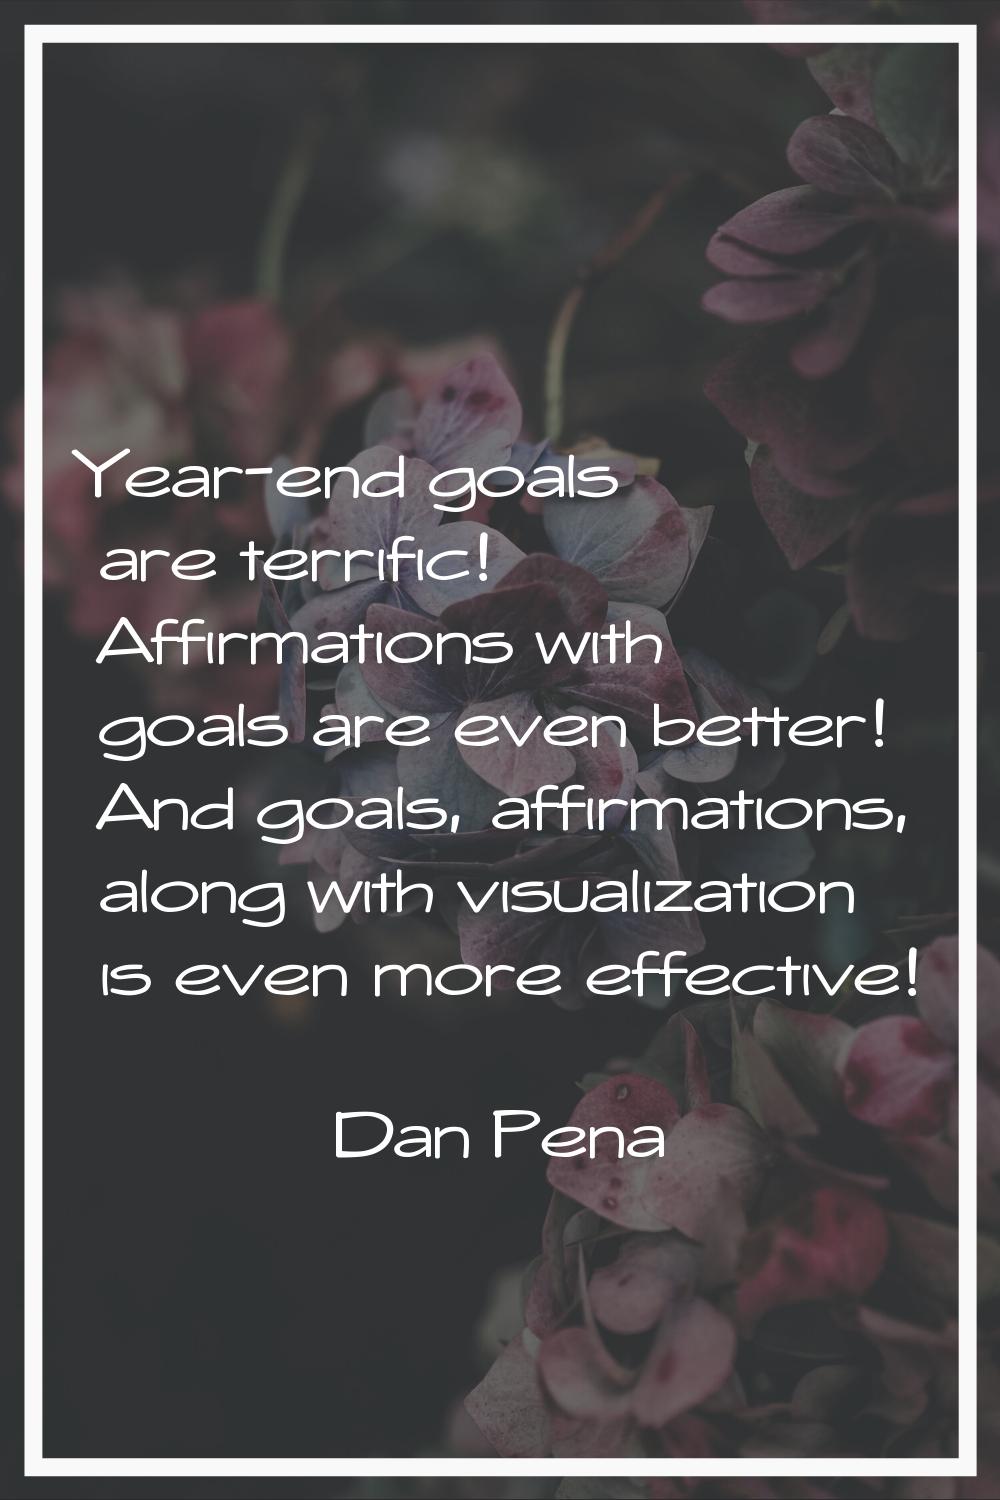 Year-end goals are terrific! Affirmations with goals are even better! And goals, affirmations, alon